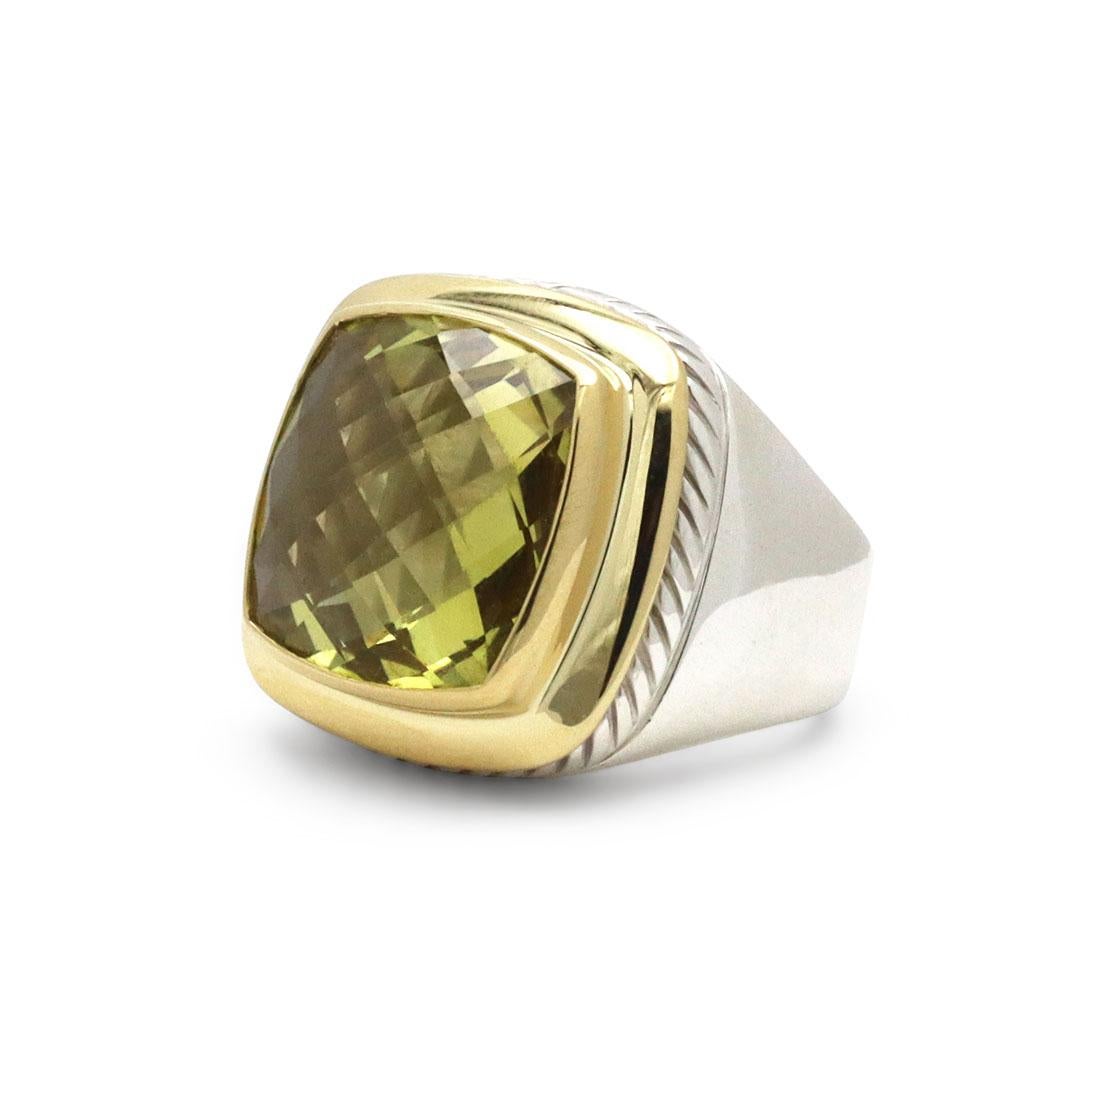 Authentic David Yurman Albion ring crafted in silver and 18 karat yellow gold centering on a square faceted peridot stone. Signed DY, 750, 925. Ring size 7. Ring is accompanied by the original David Yurman pouch, no box or papers. CIRCA